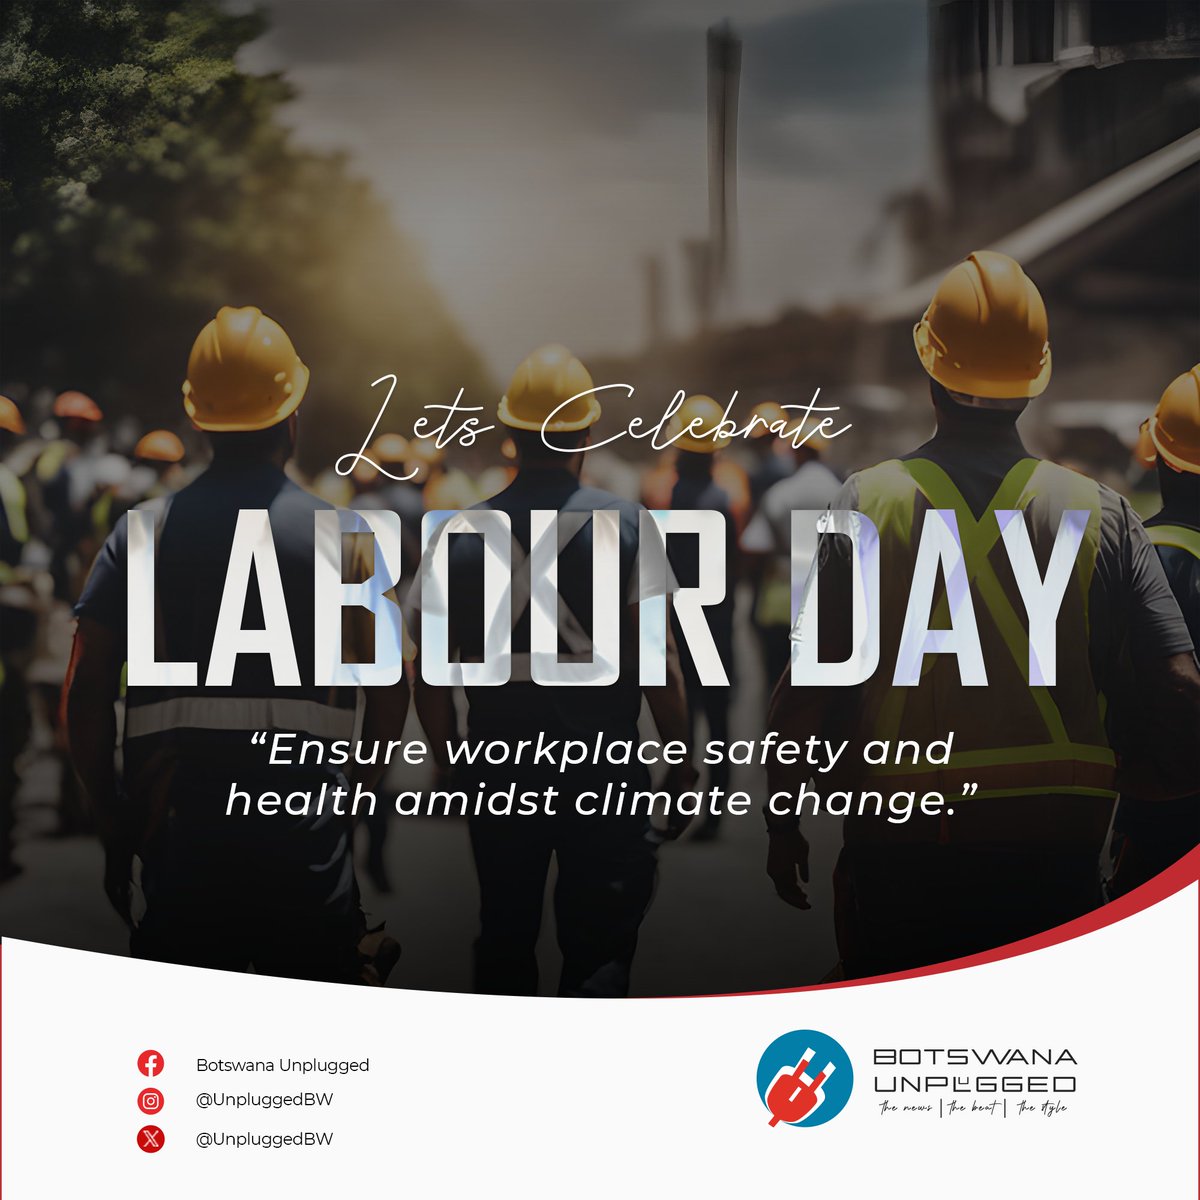 𝗘 𝗧𝗔𝗣𝗢𝗟𝗢𝗦𝗘 𝗠𝗢𝗧𝗦𝗪𝗔𝗡𝗔⛱⛱!!-Here's to the workers who keep the wheels of Botswana's progress turning. Happy Labor Day Motswana! #labourday #labourdaybotswana #safetyandhealth #climatechange #unpluggedbw